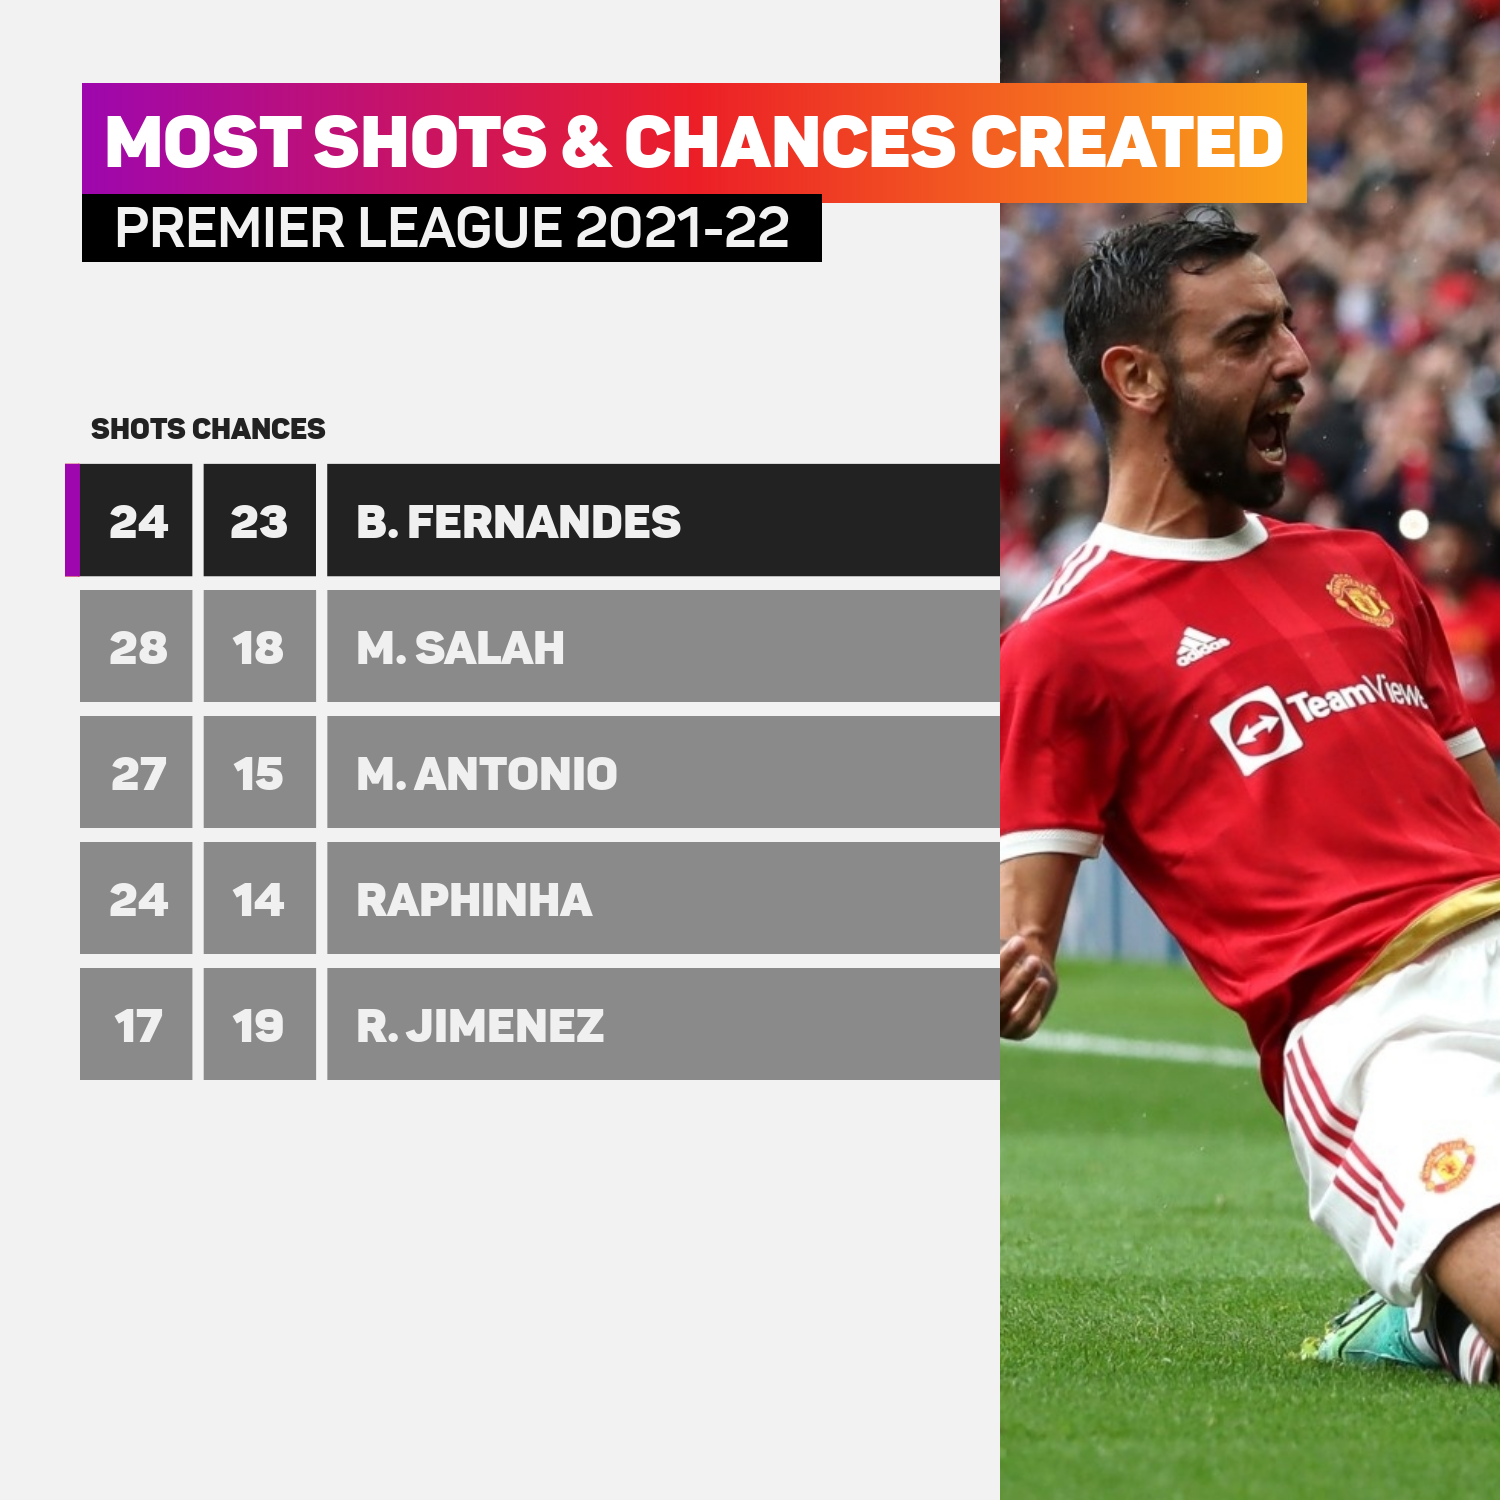 Most shots and chances created in PL 2021-22